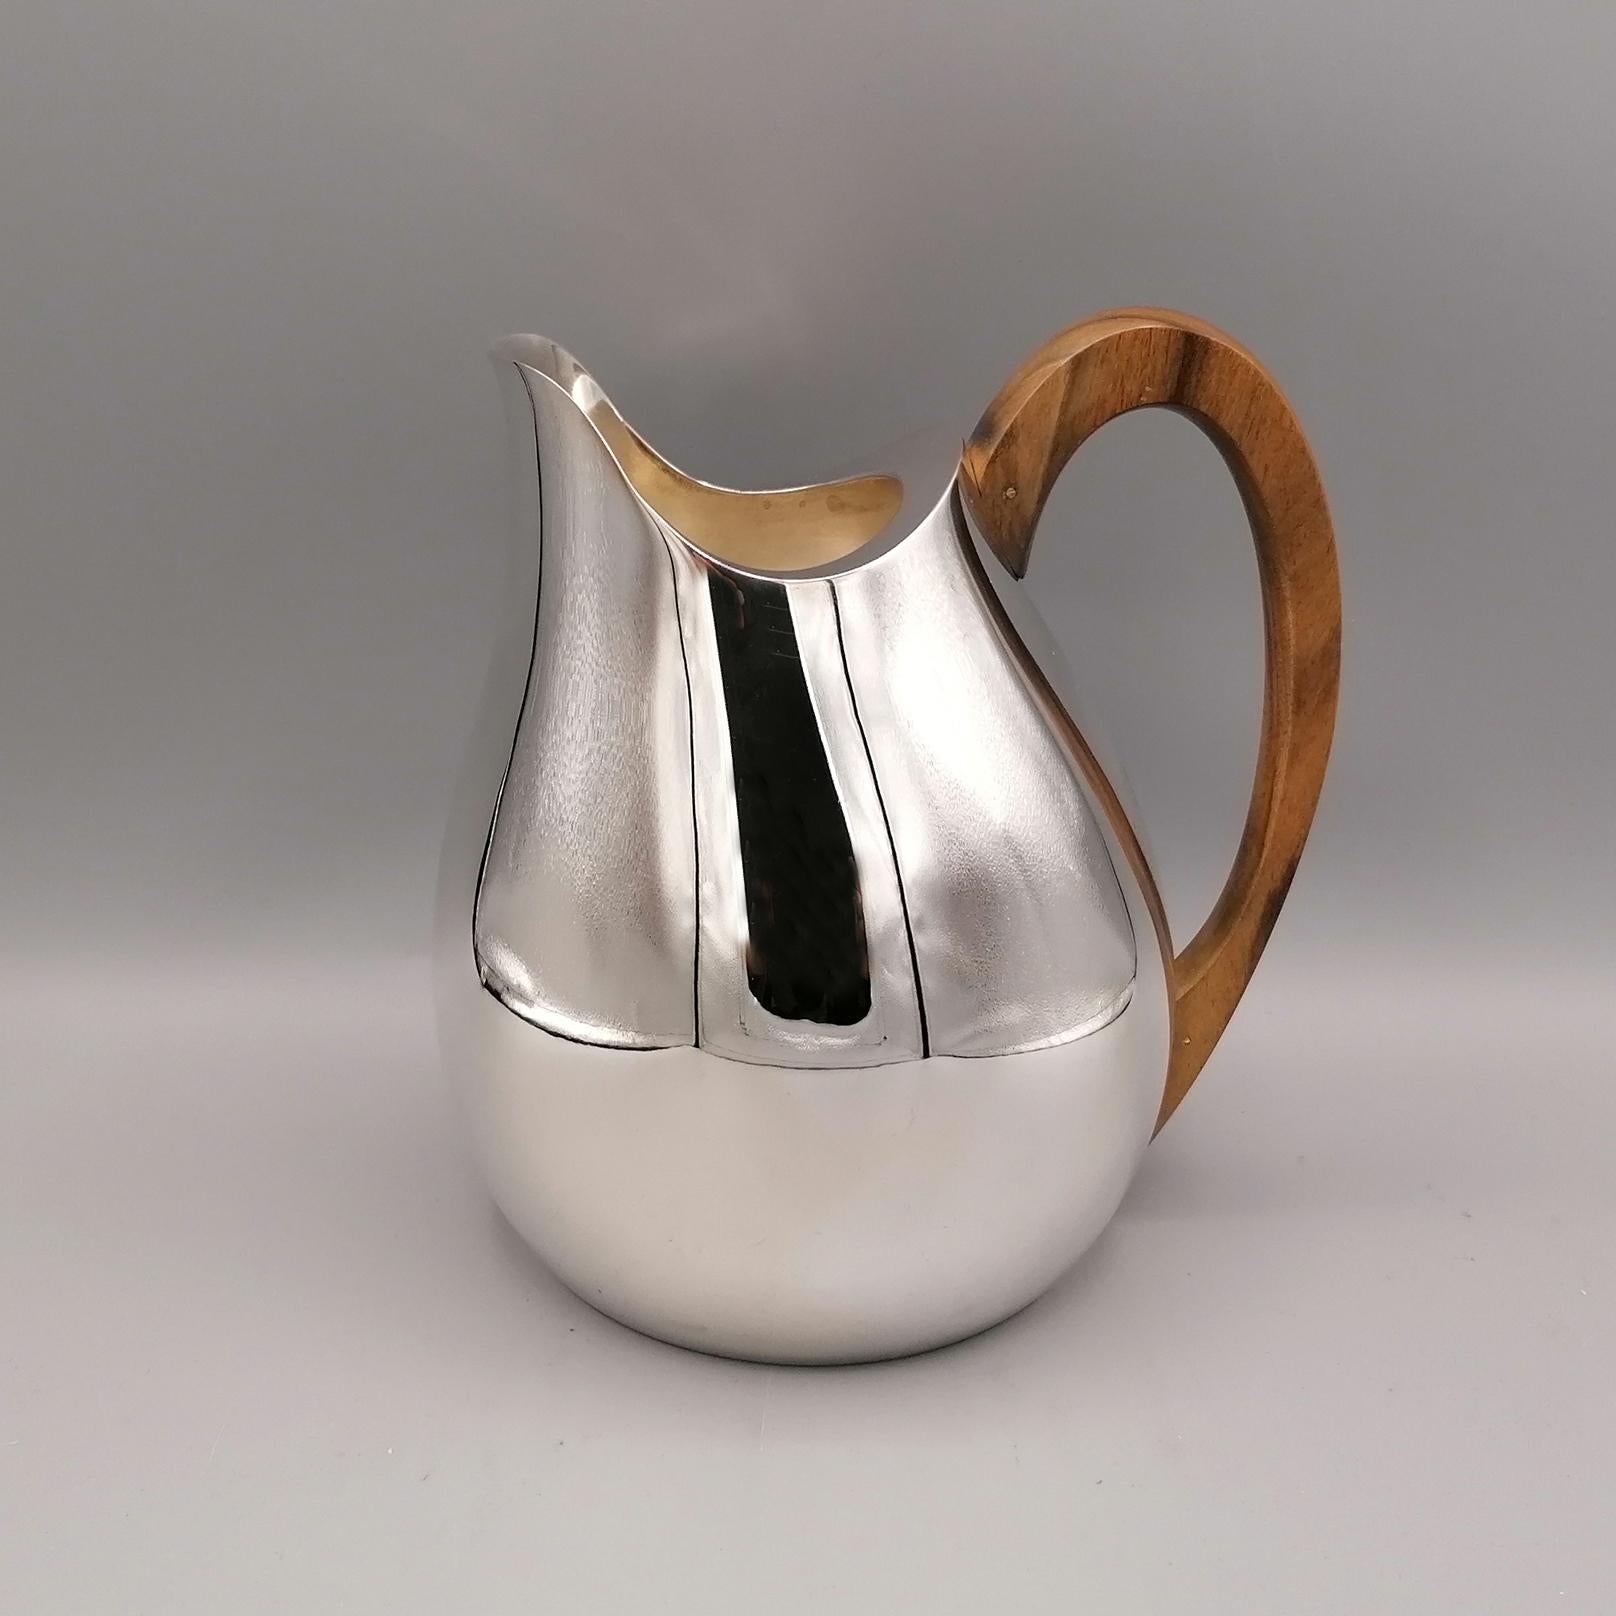 21st Century Italian Sterling Silver Jug with wood Handle 6